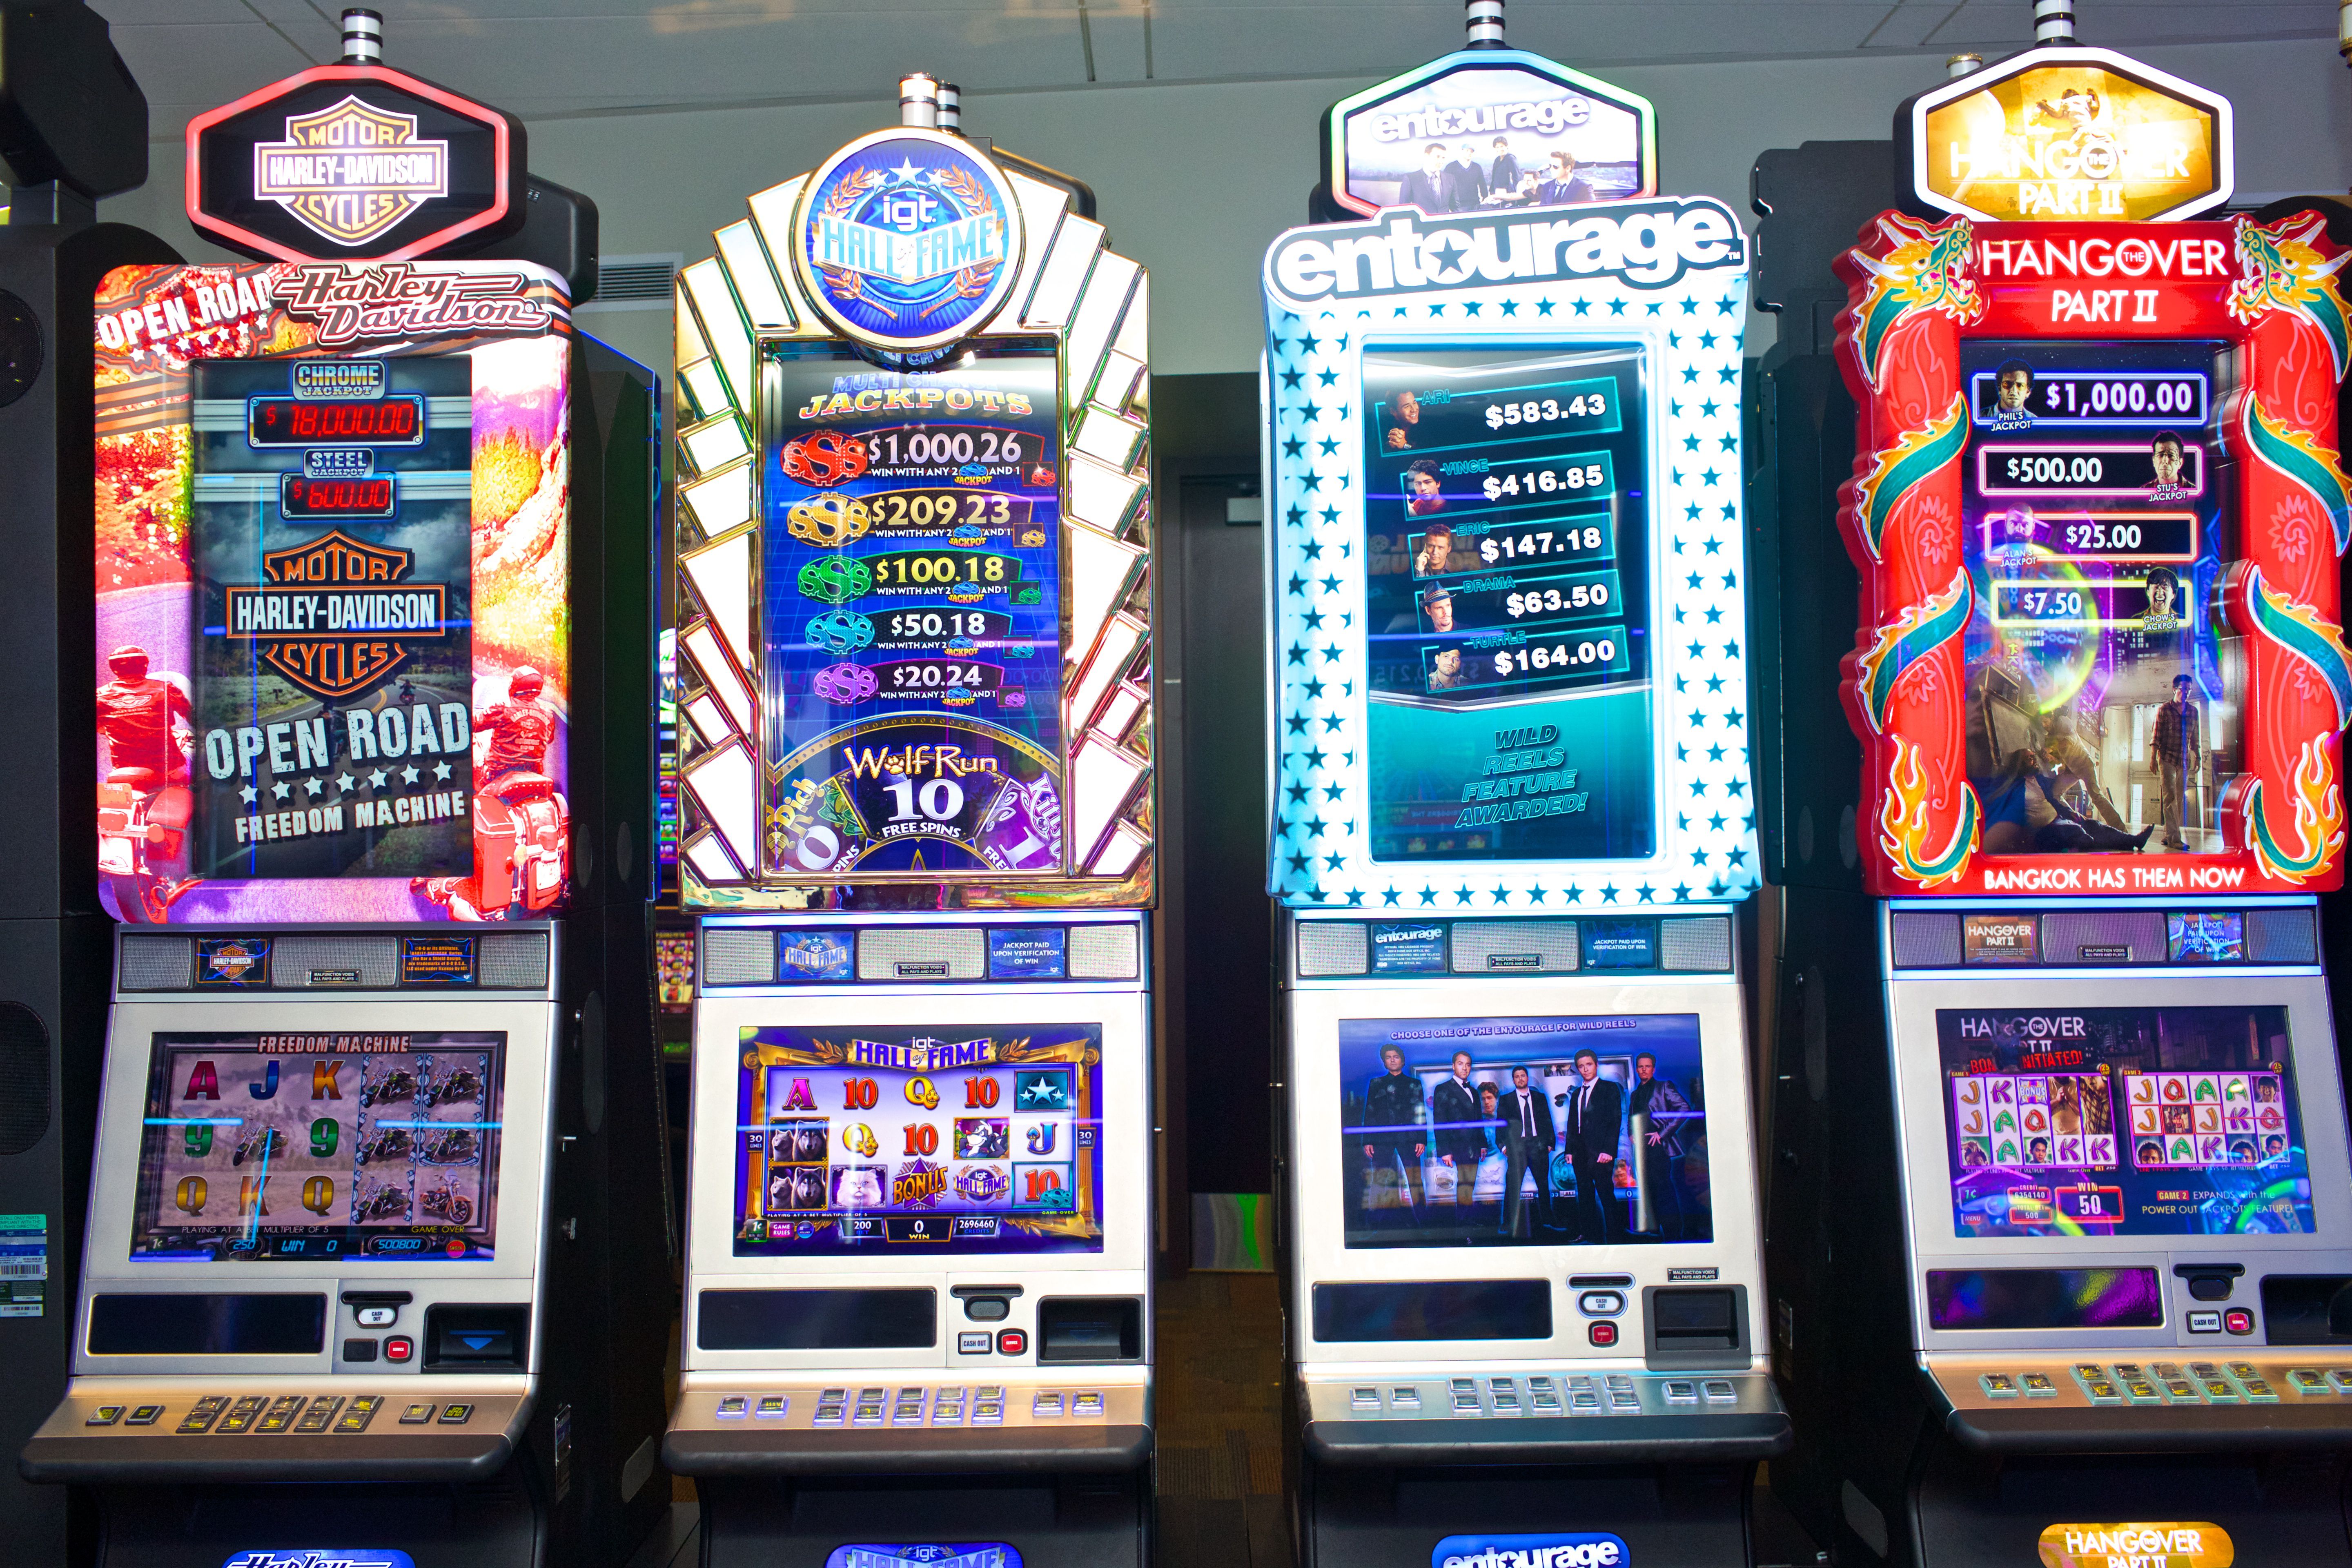 Used casino slot machines for sale cheap